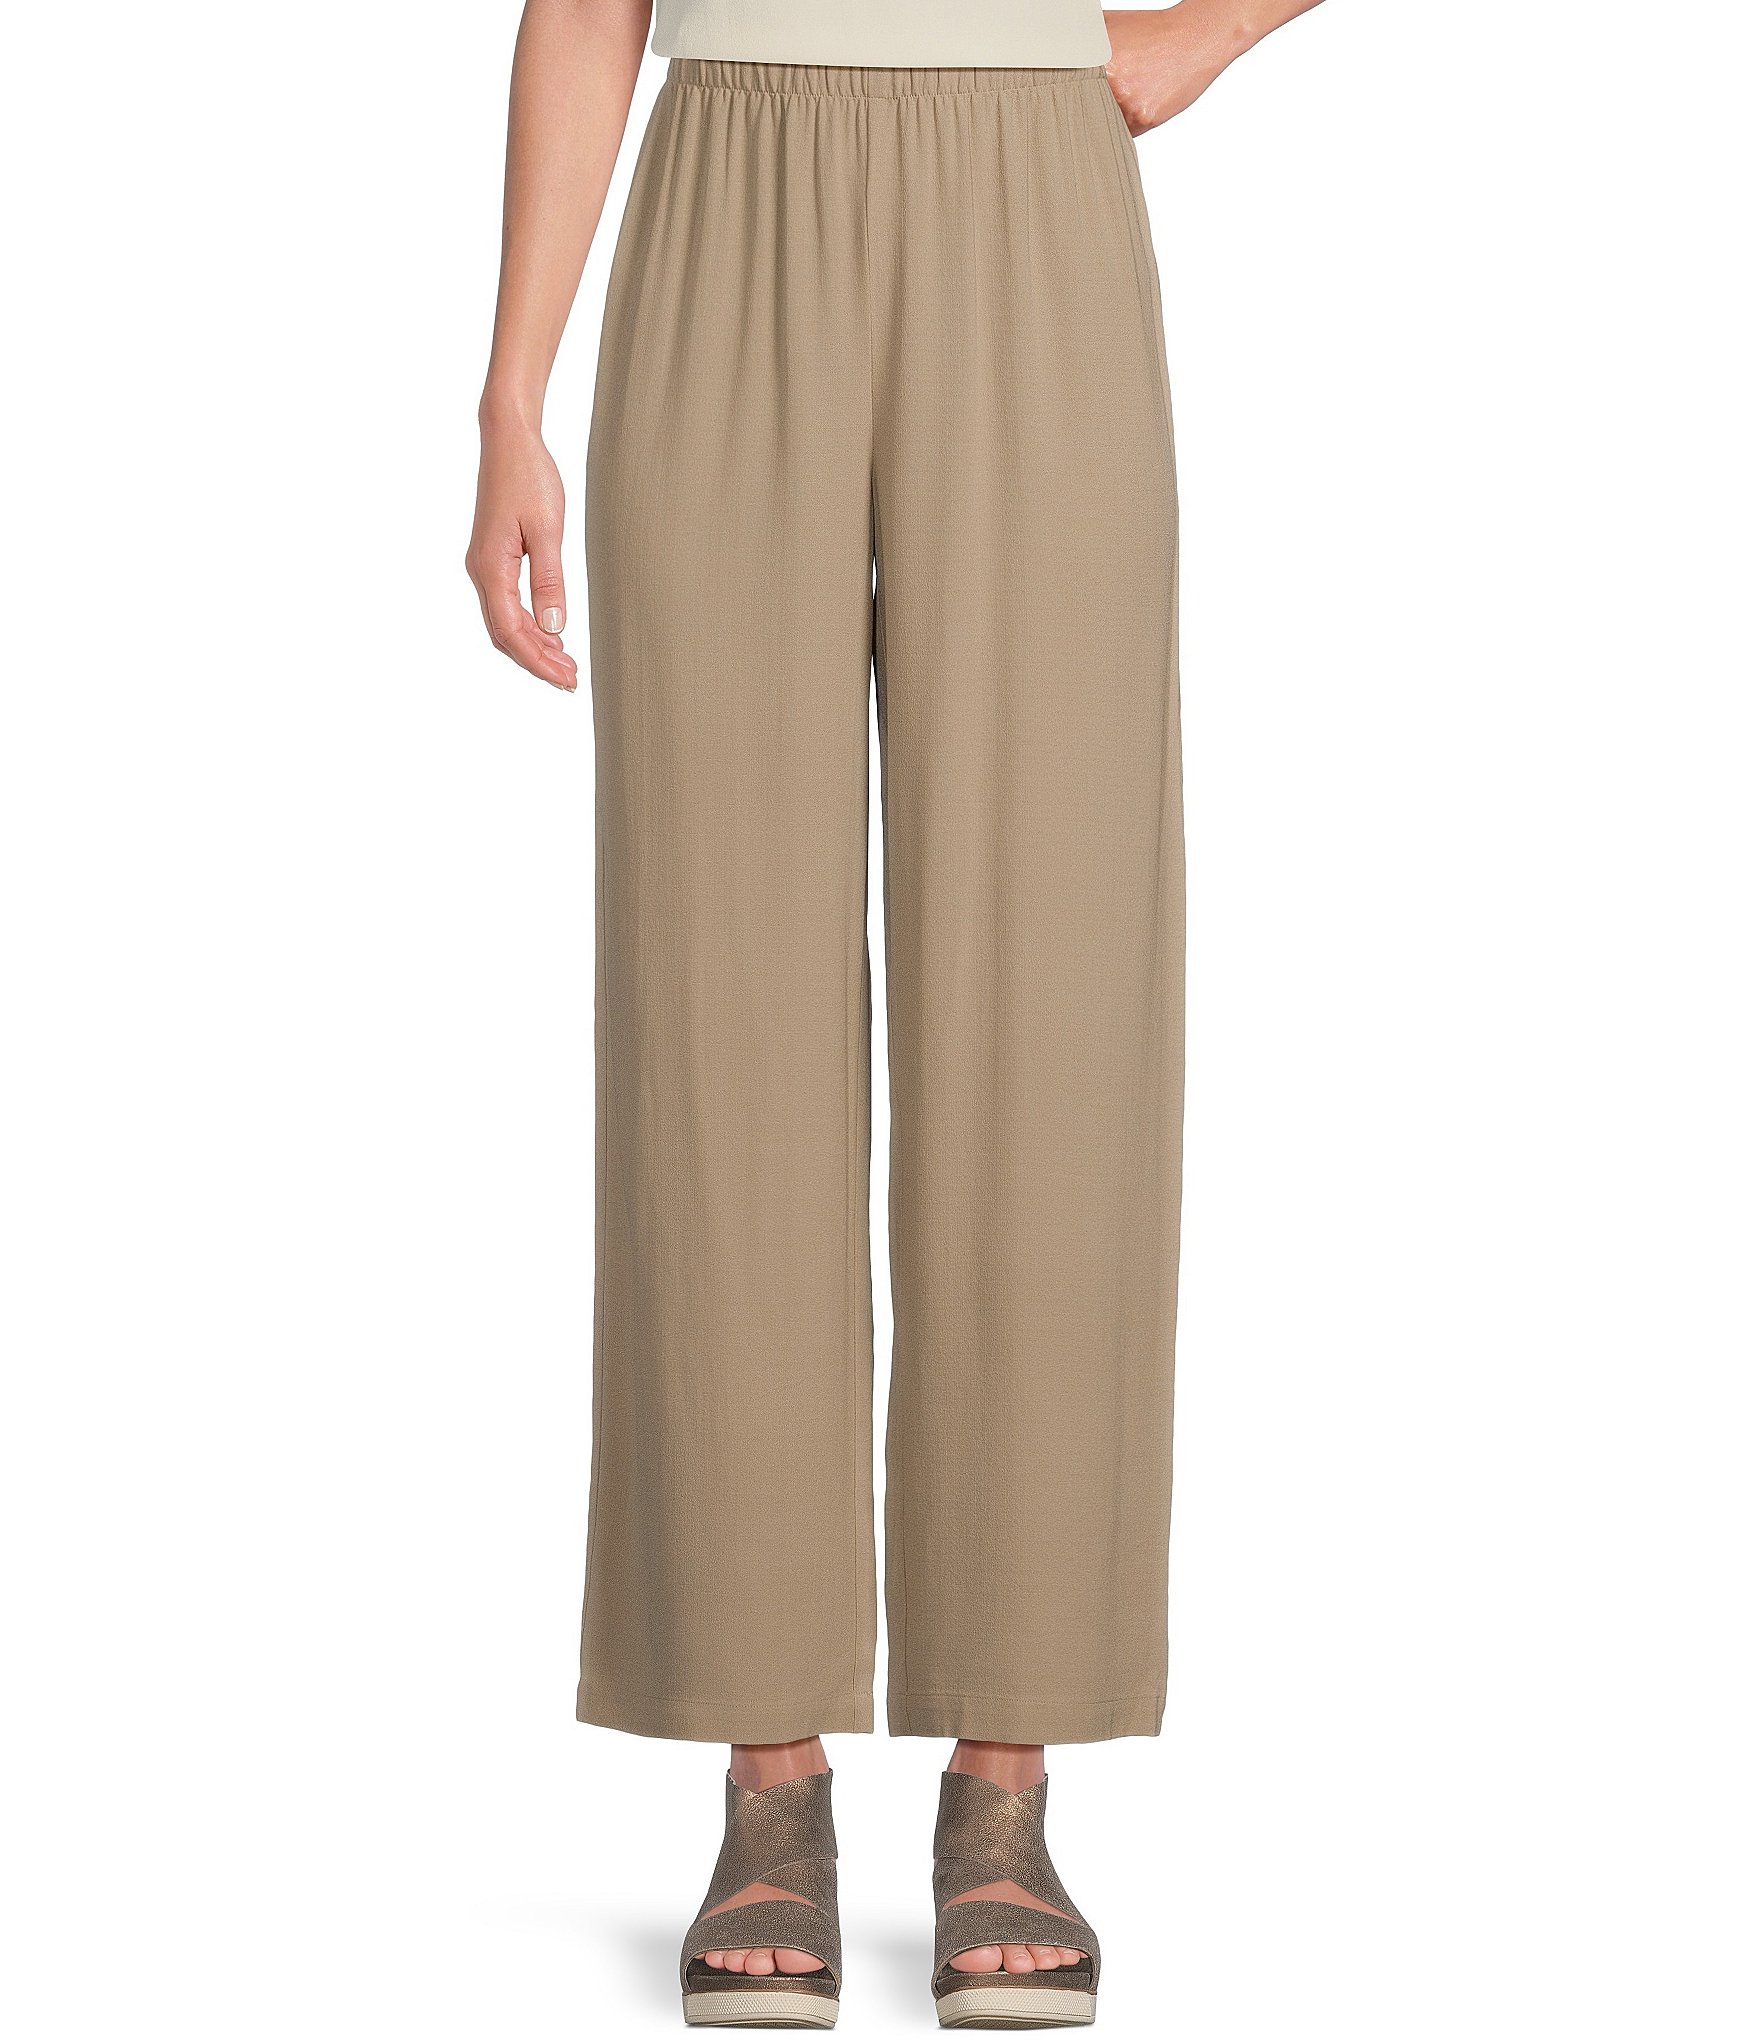 Women's Silk Wide Leg Pant Best Women Mulberry Silk Pants for Sale at the  Lowest Prices – CDCLOTH